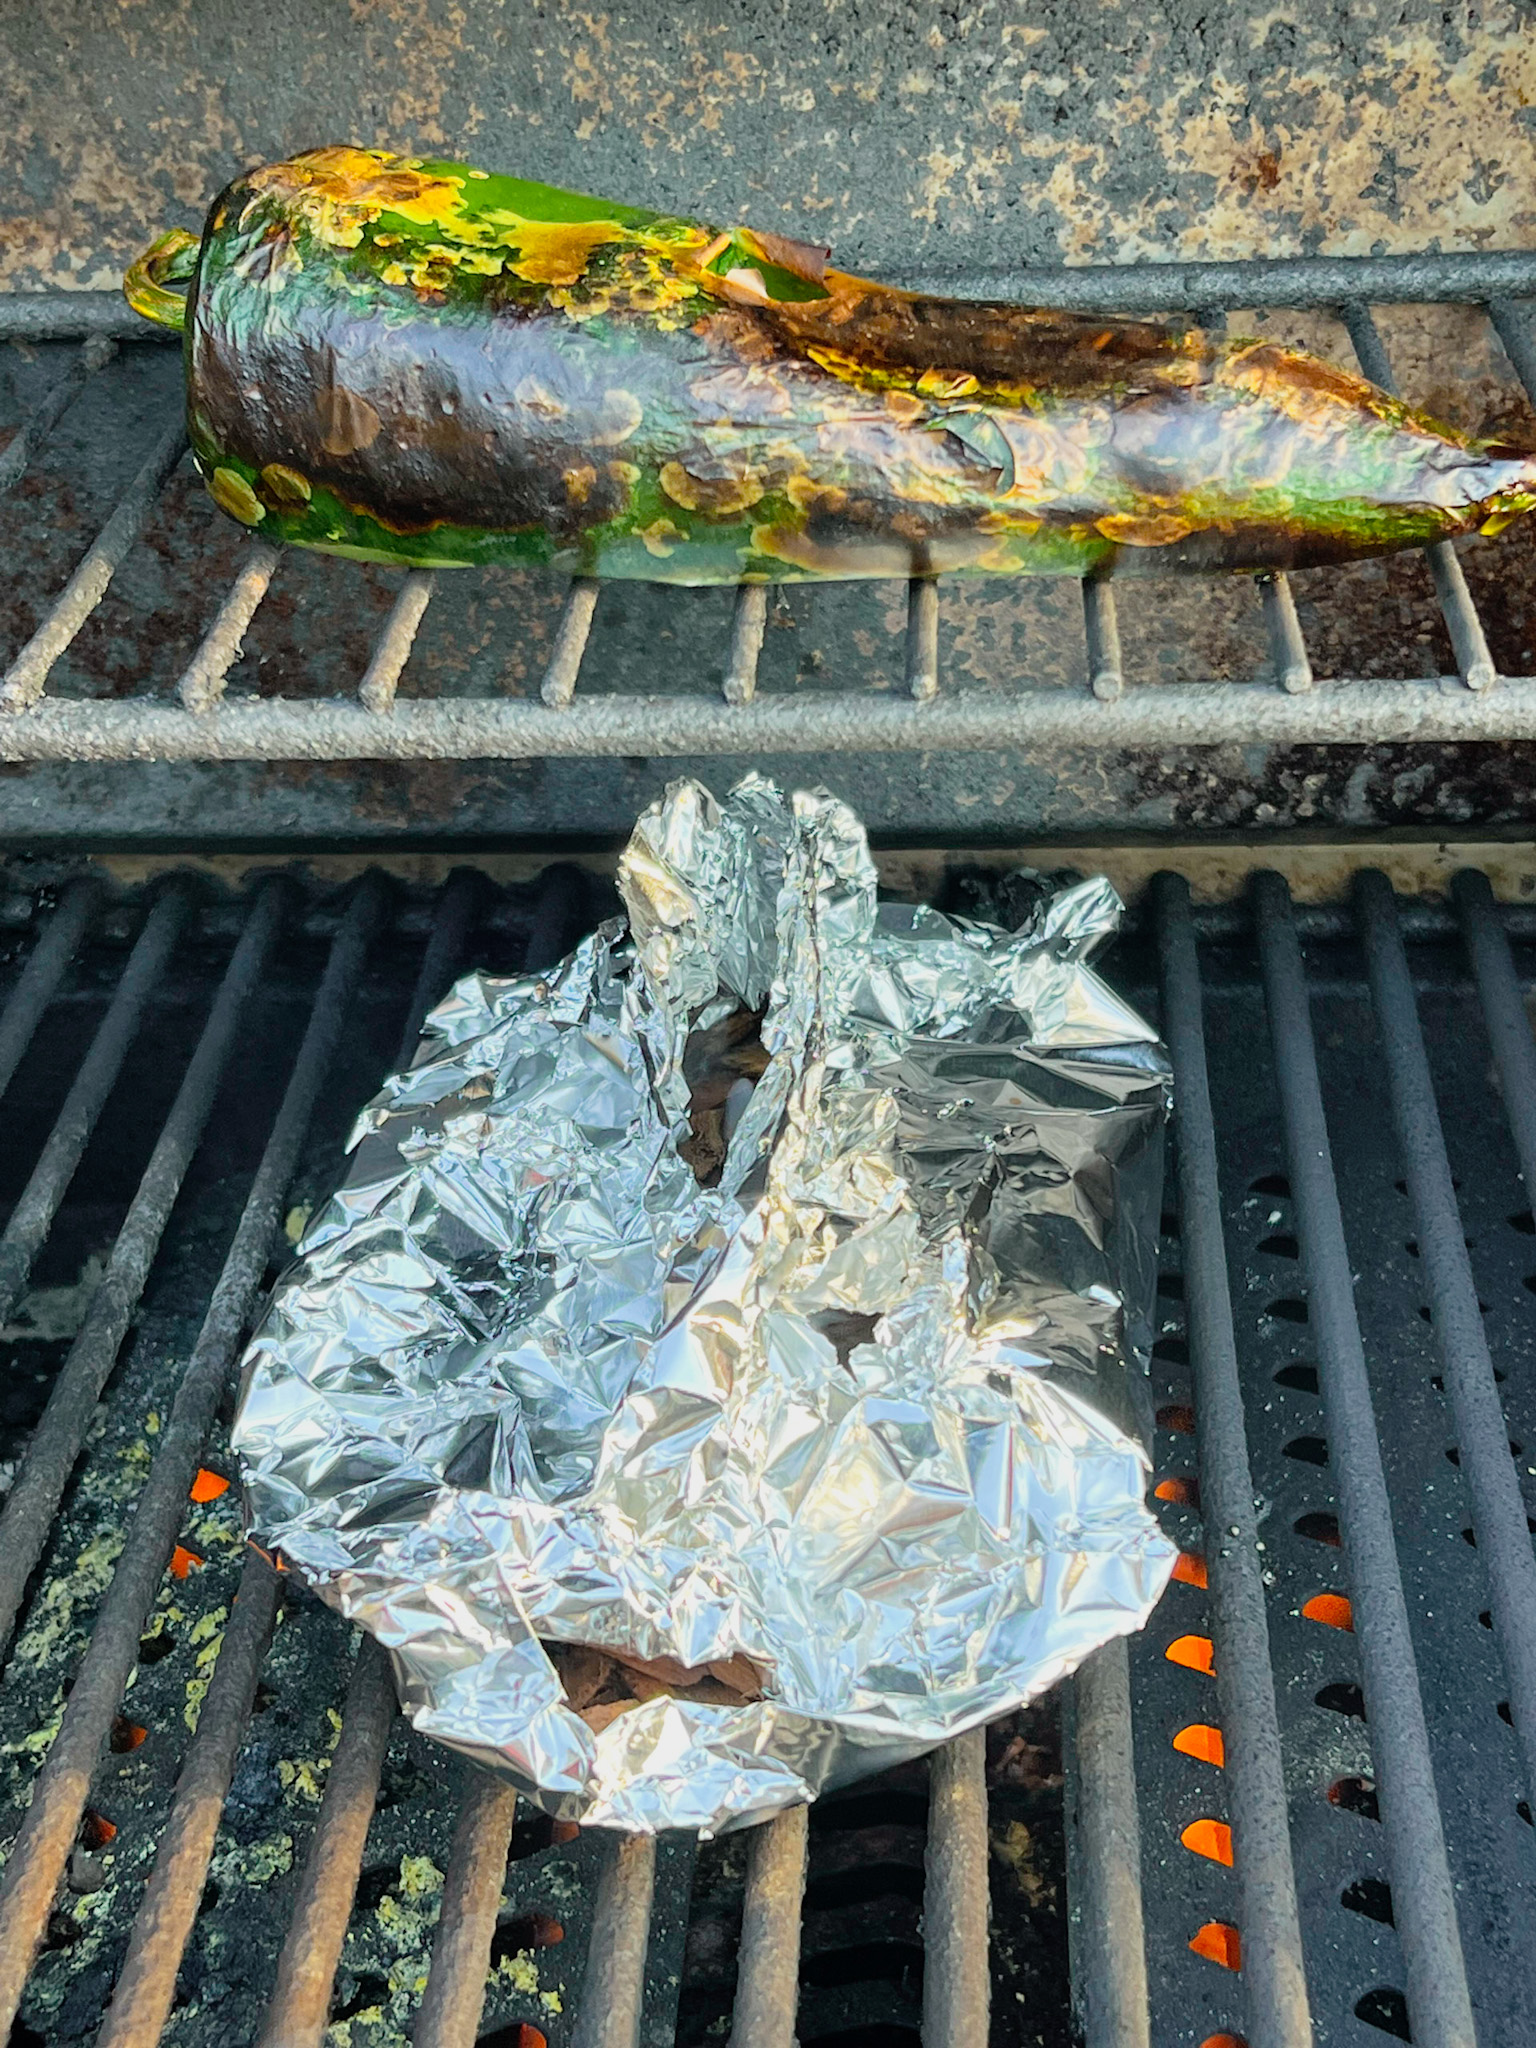 poblano pepper smoking on a grill over a foil package of wood chips